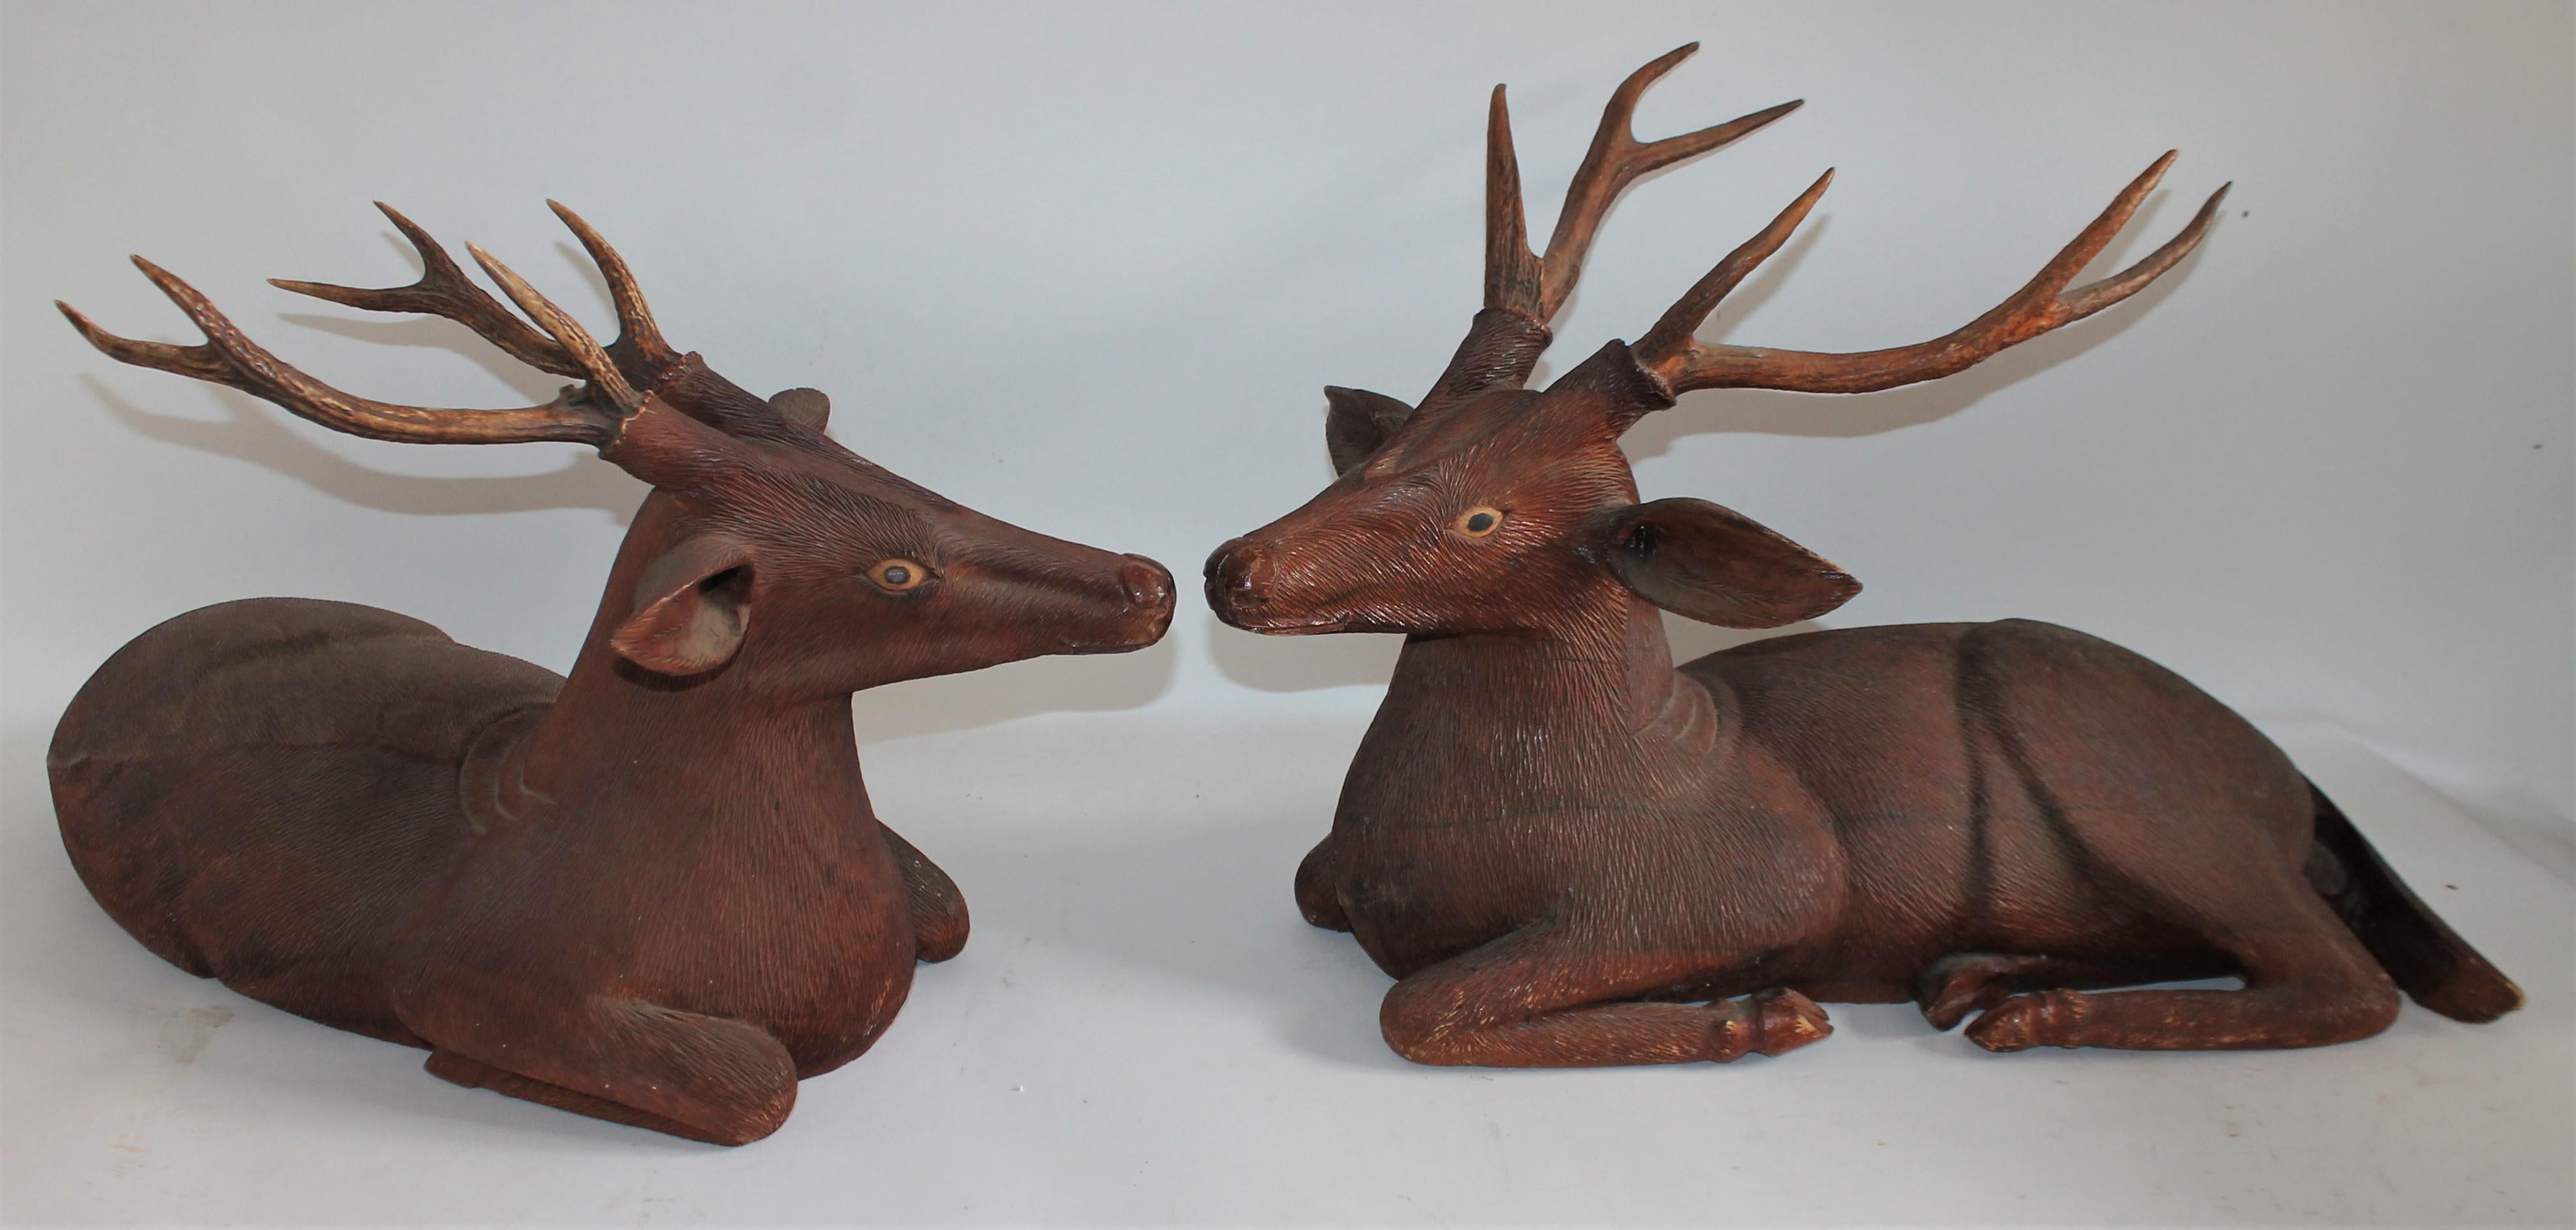 These hand carved walnut wood deer are in good condition with minor old repairs on legs or tail. The eyes are hand painted and original. The antlers are made or resin or something formed.

Shorter antler stag measures- 29 wide x 17 high x 14.5